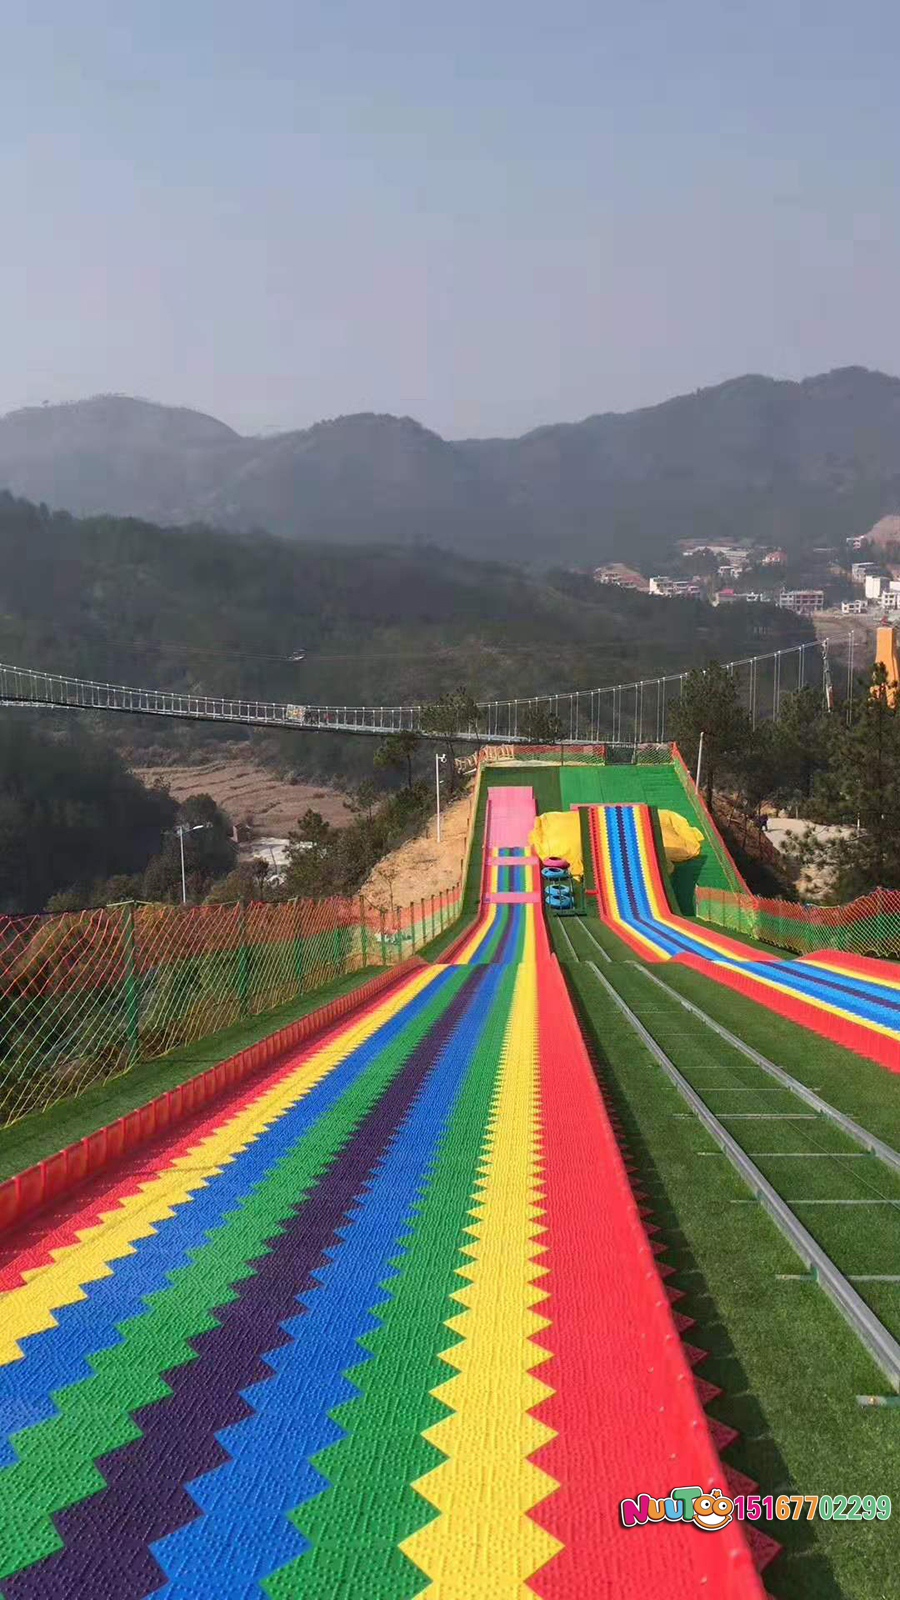 How to operate the colorful slide tourism project